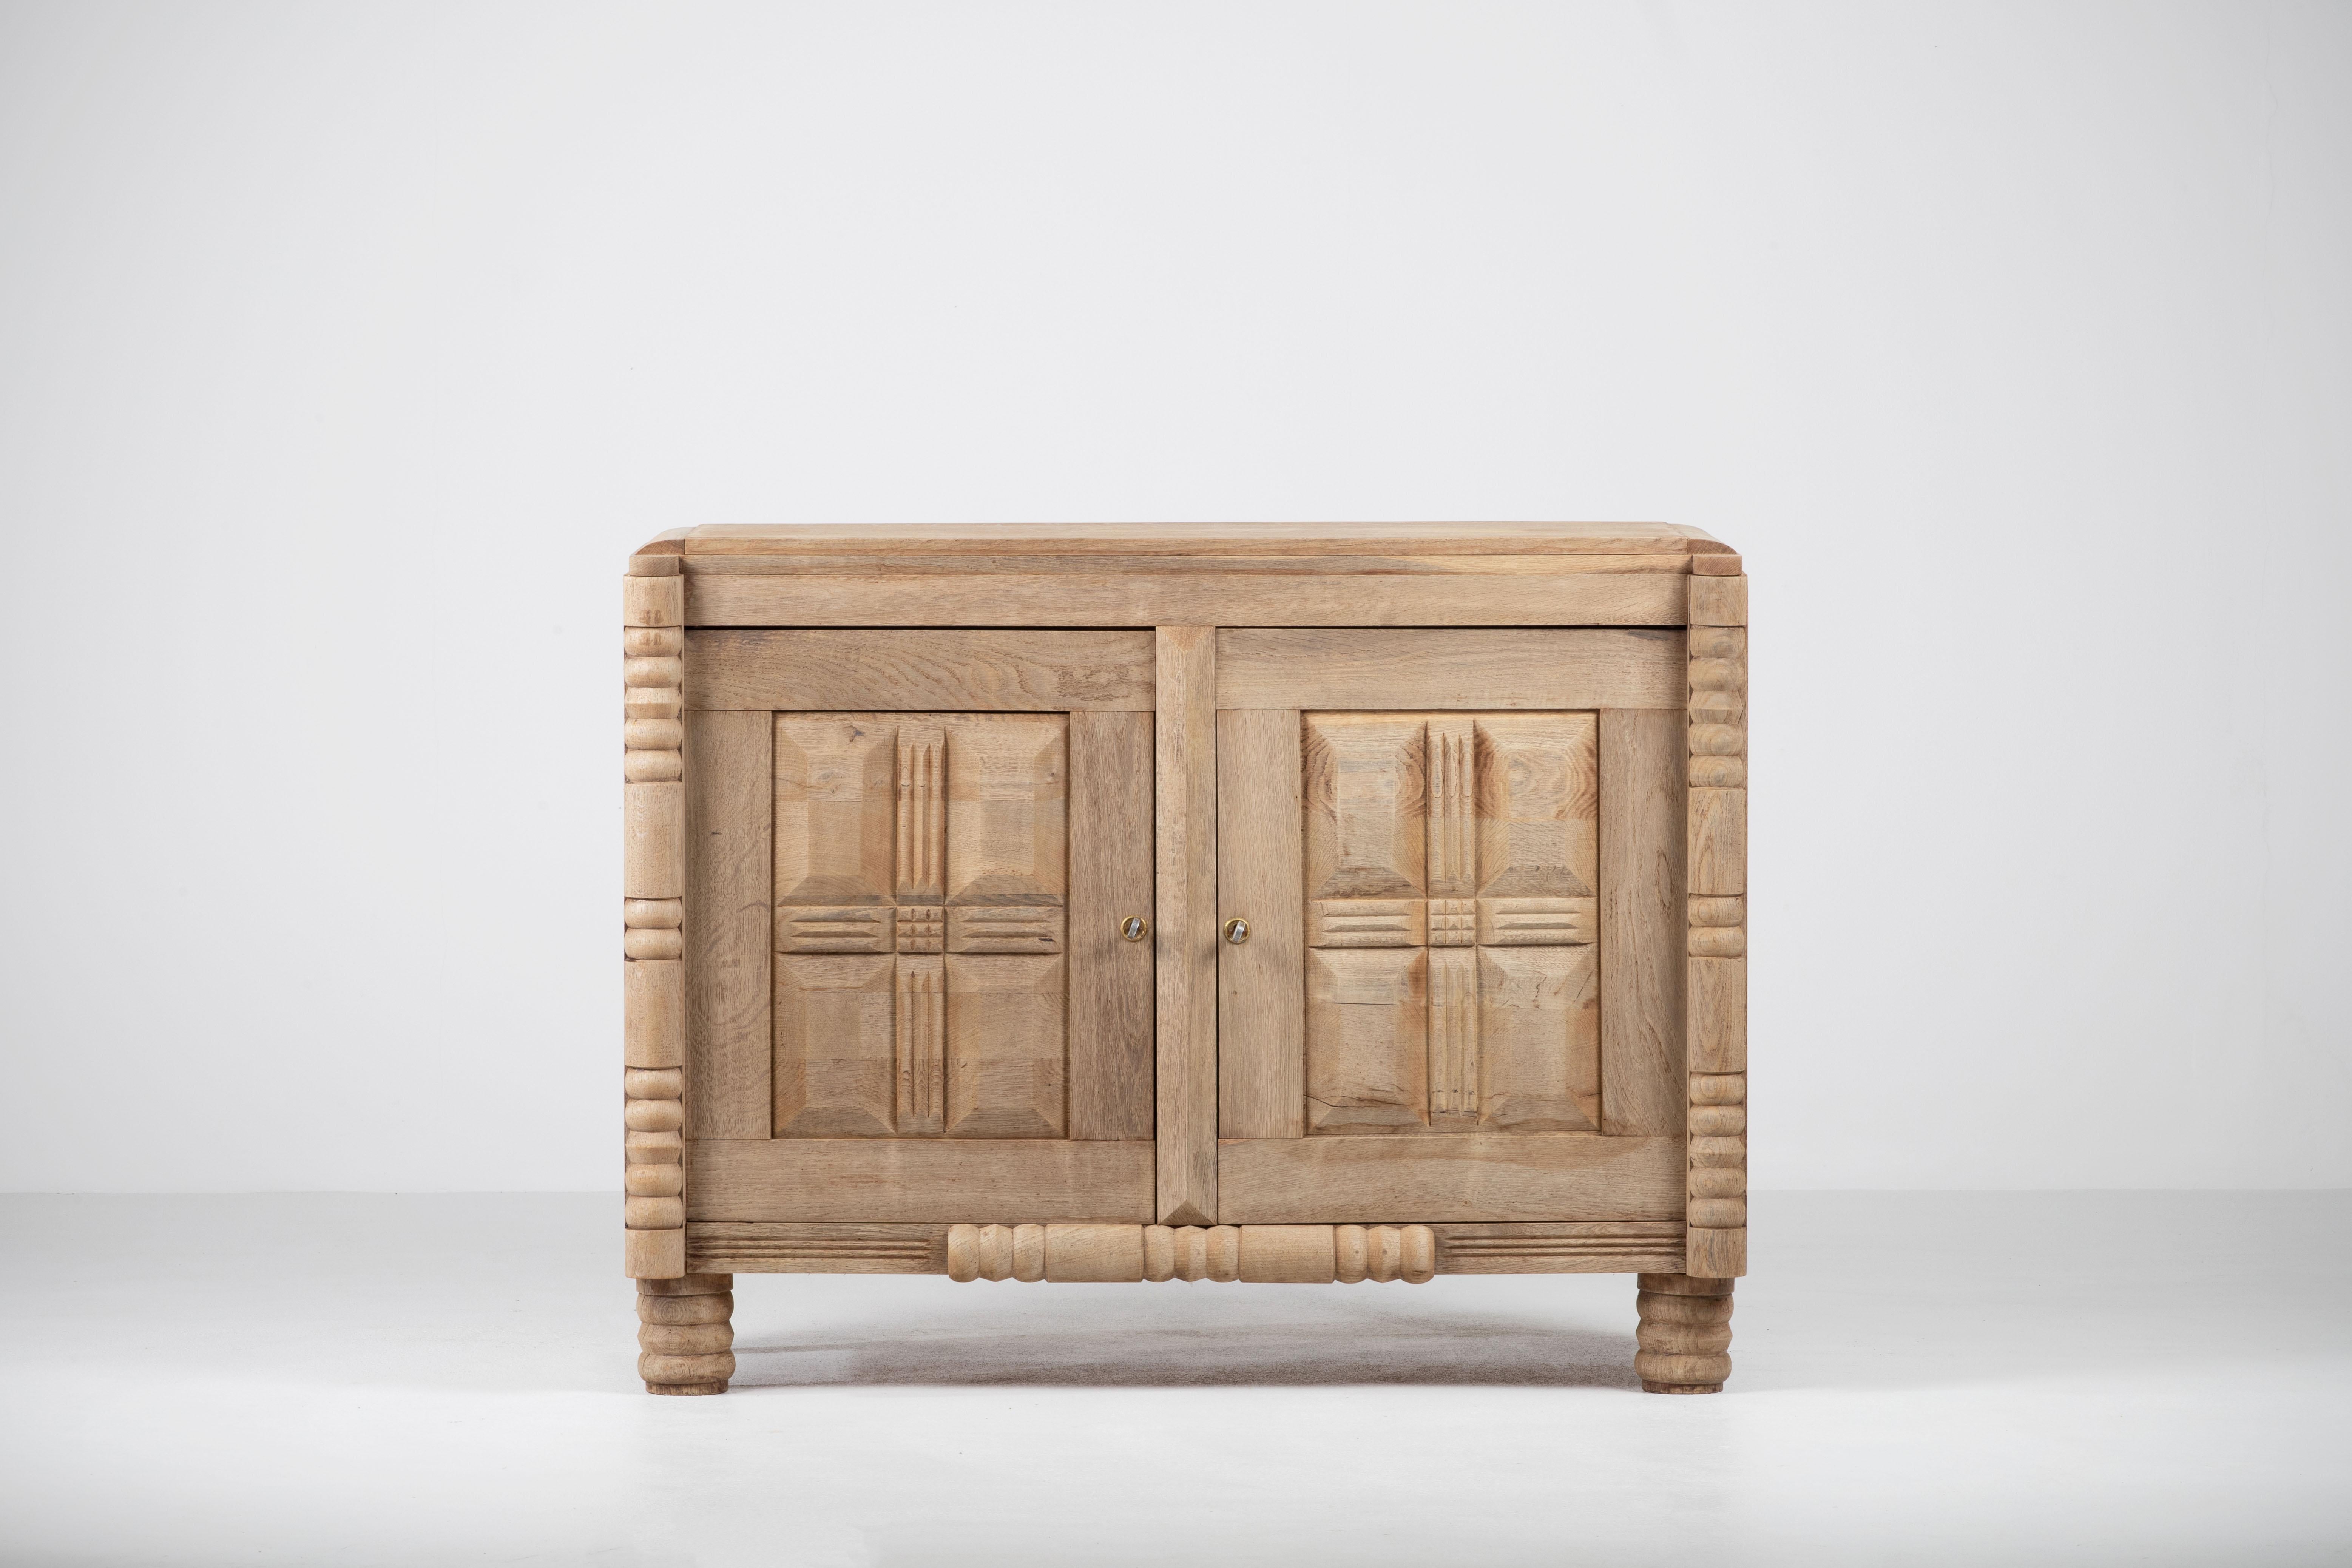 Credenza, solid oak, France, 1940s, after Charles Dudouyt.
The credenza consists of two storage facilities and covered with very detailed designed doors.
We offer this piece in a bleached finish.